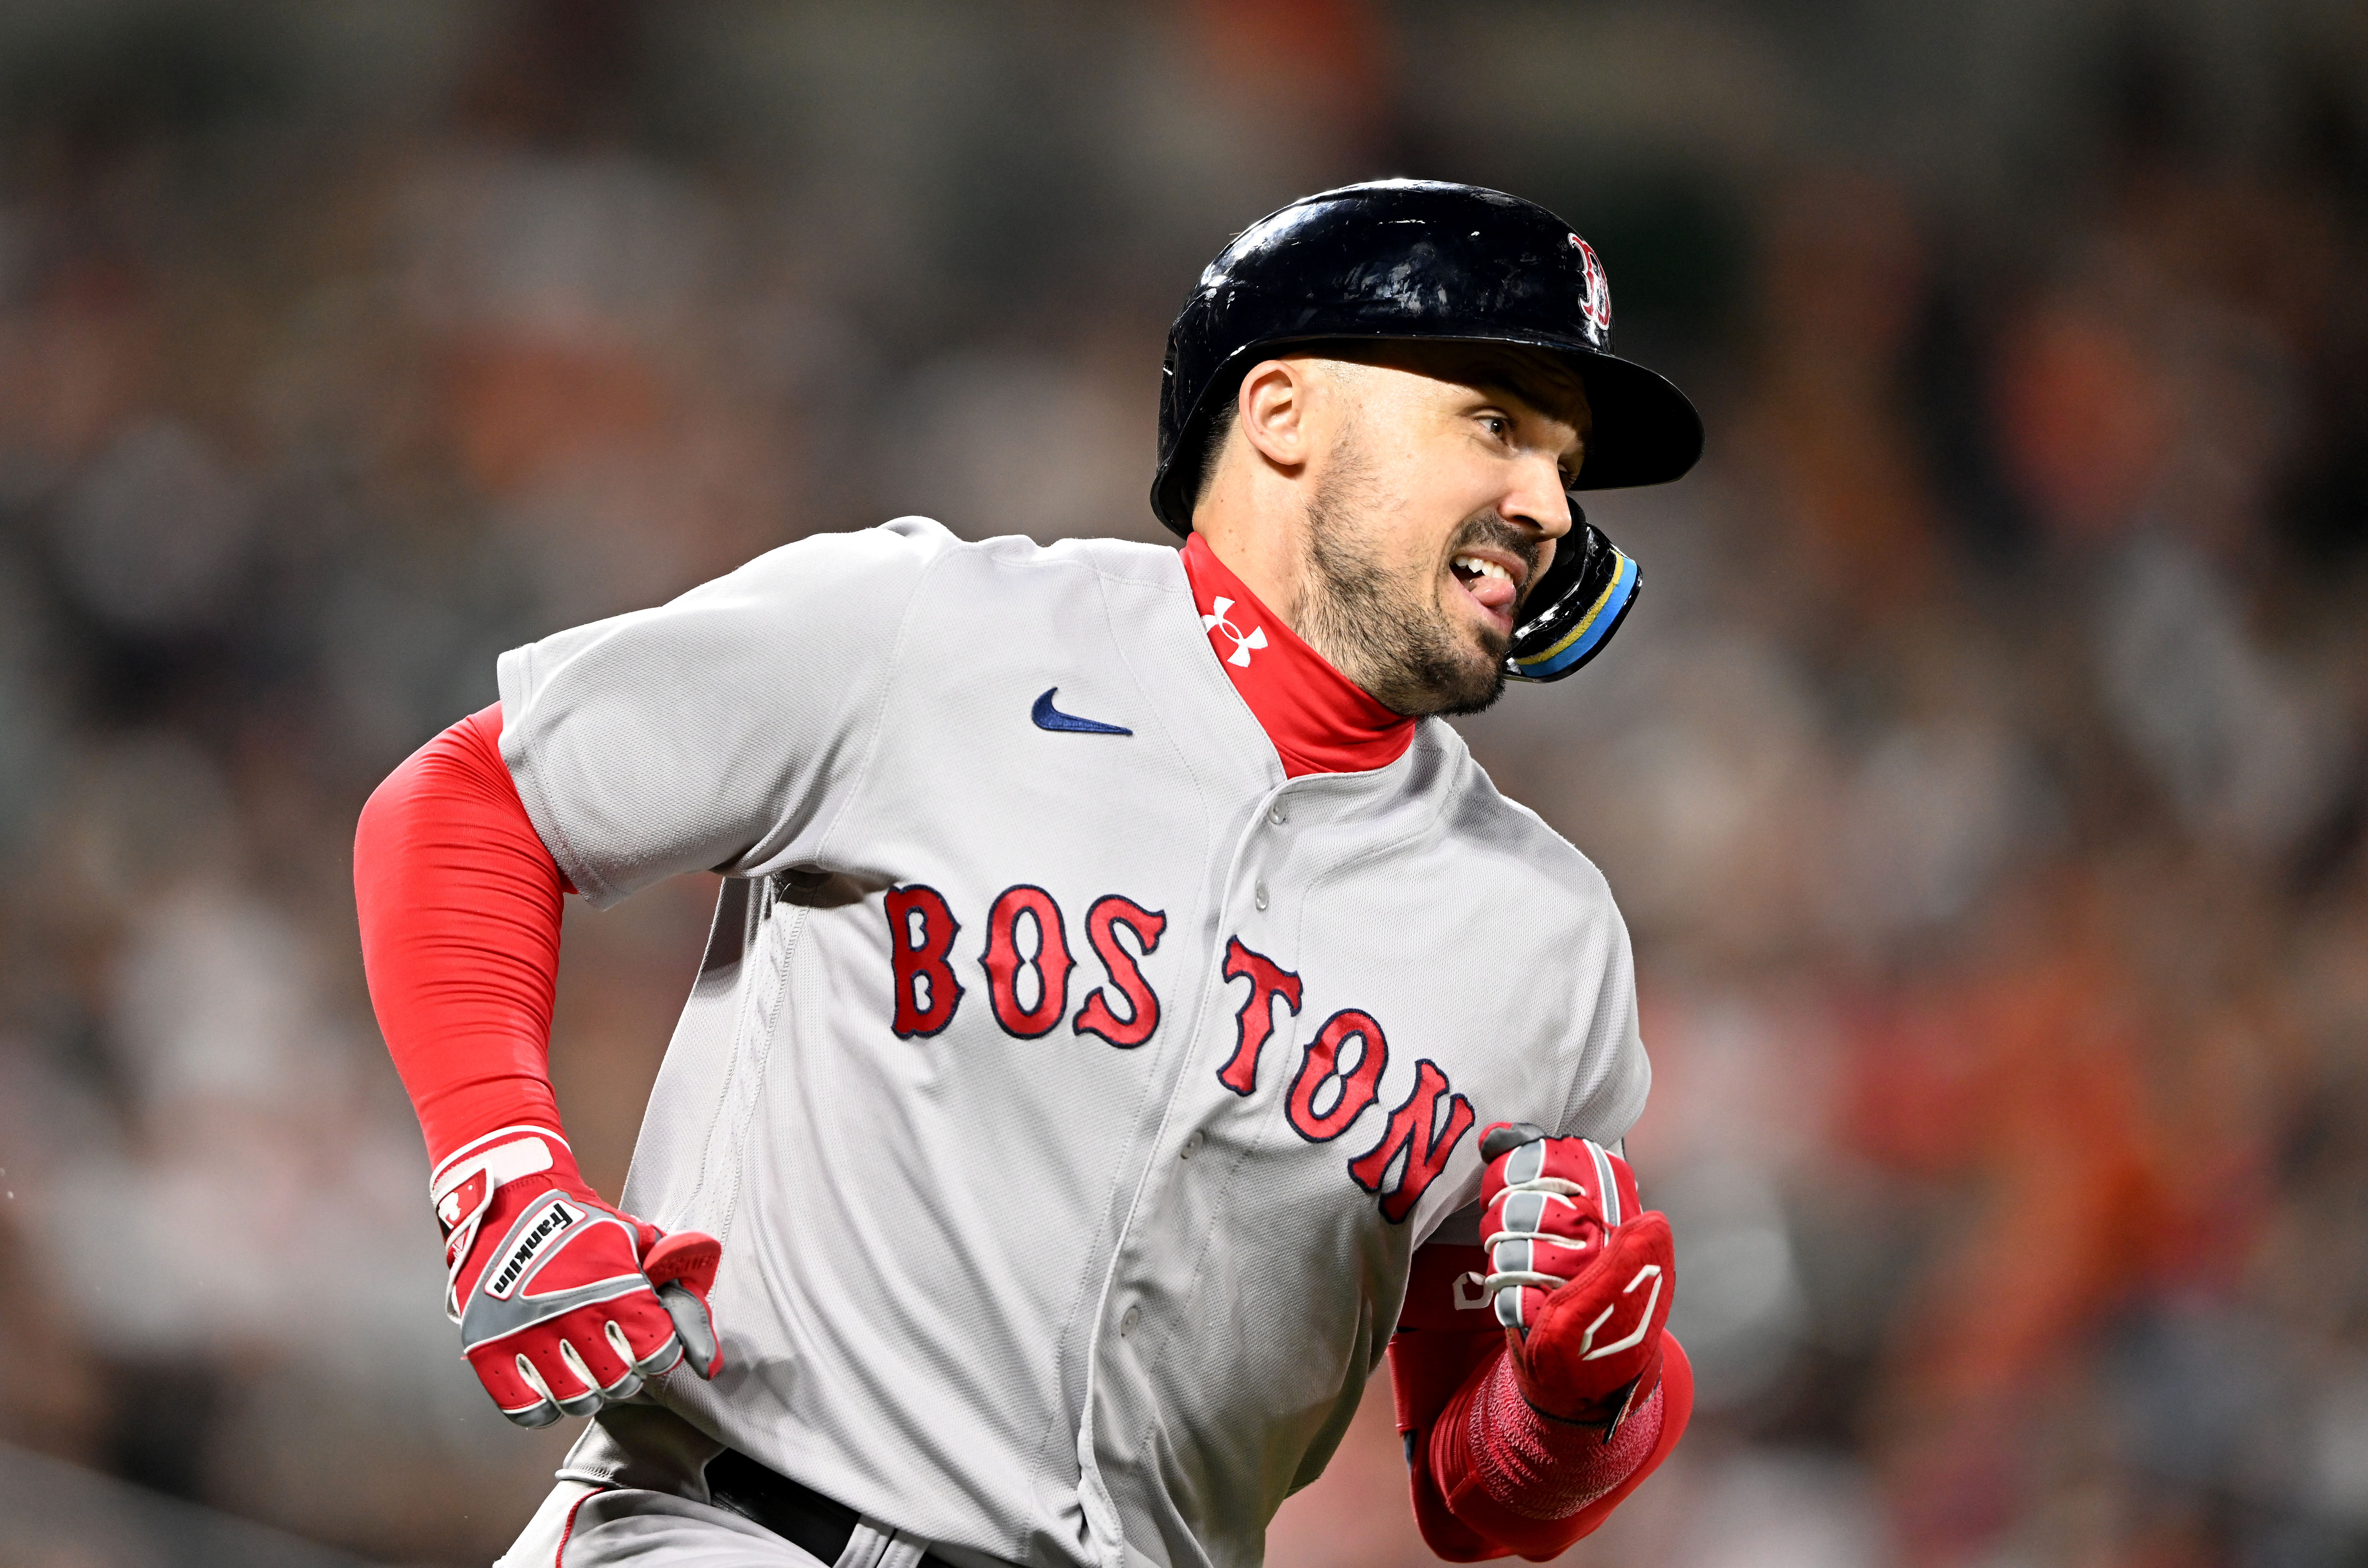 Moment you live for,' Victorino says of series-winning slam